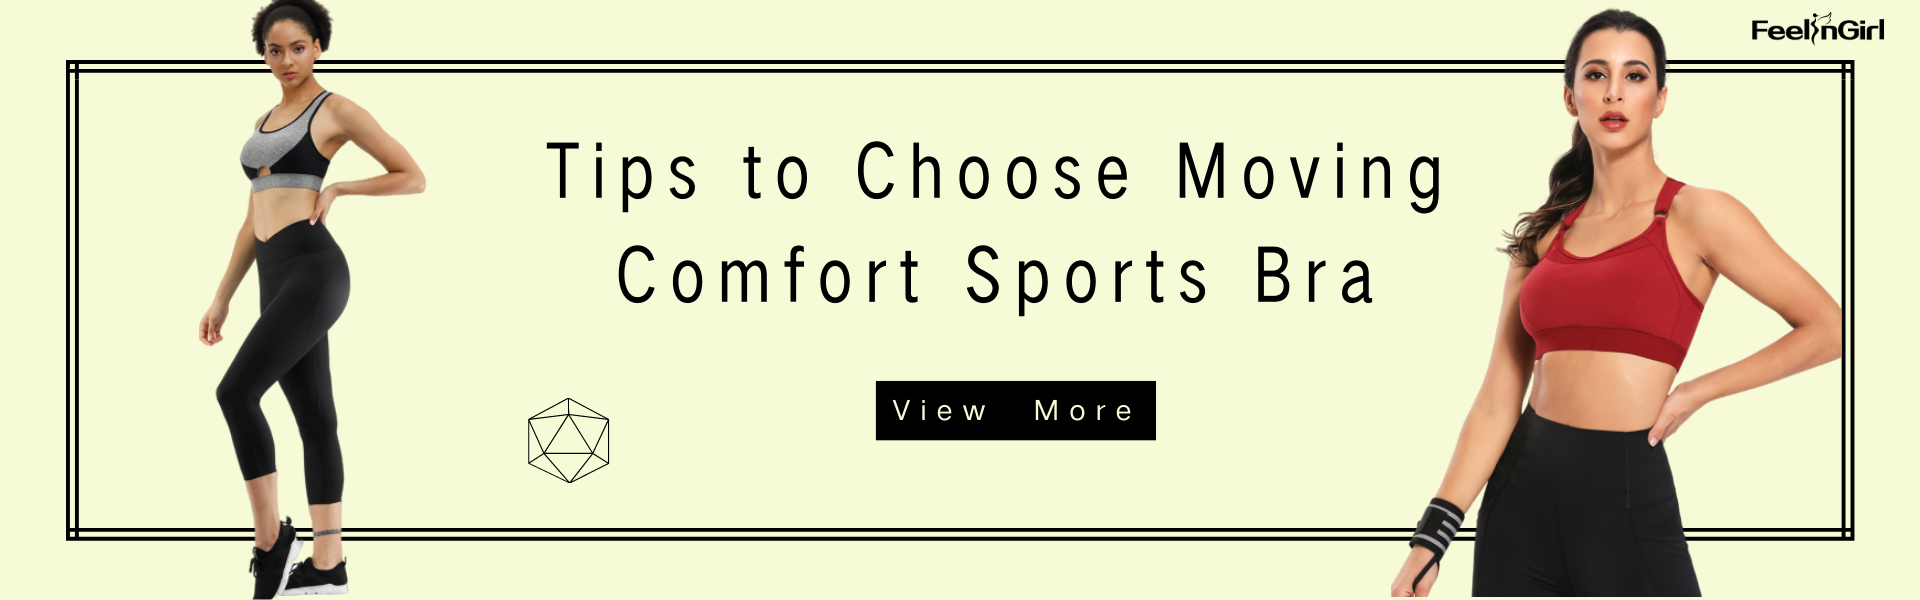 Tips to Choose Moving Comfort Sports Bra